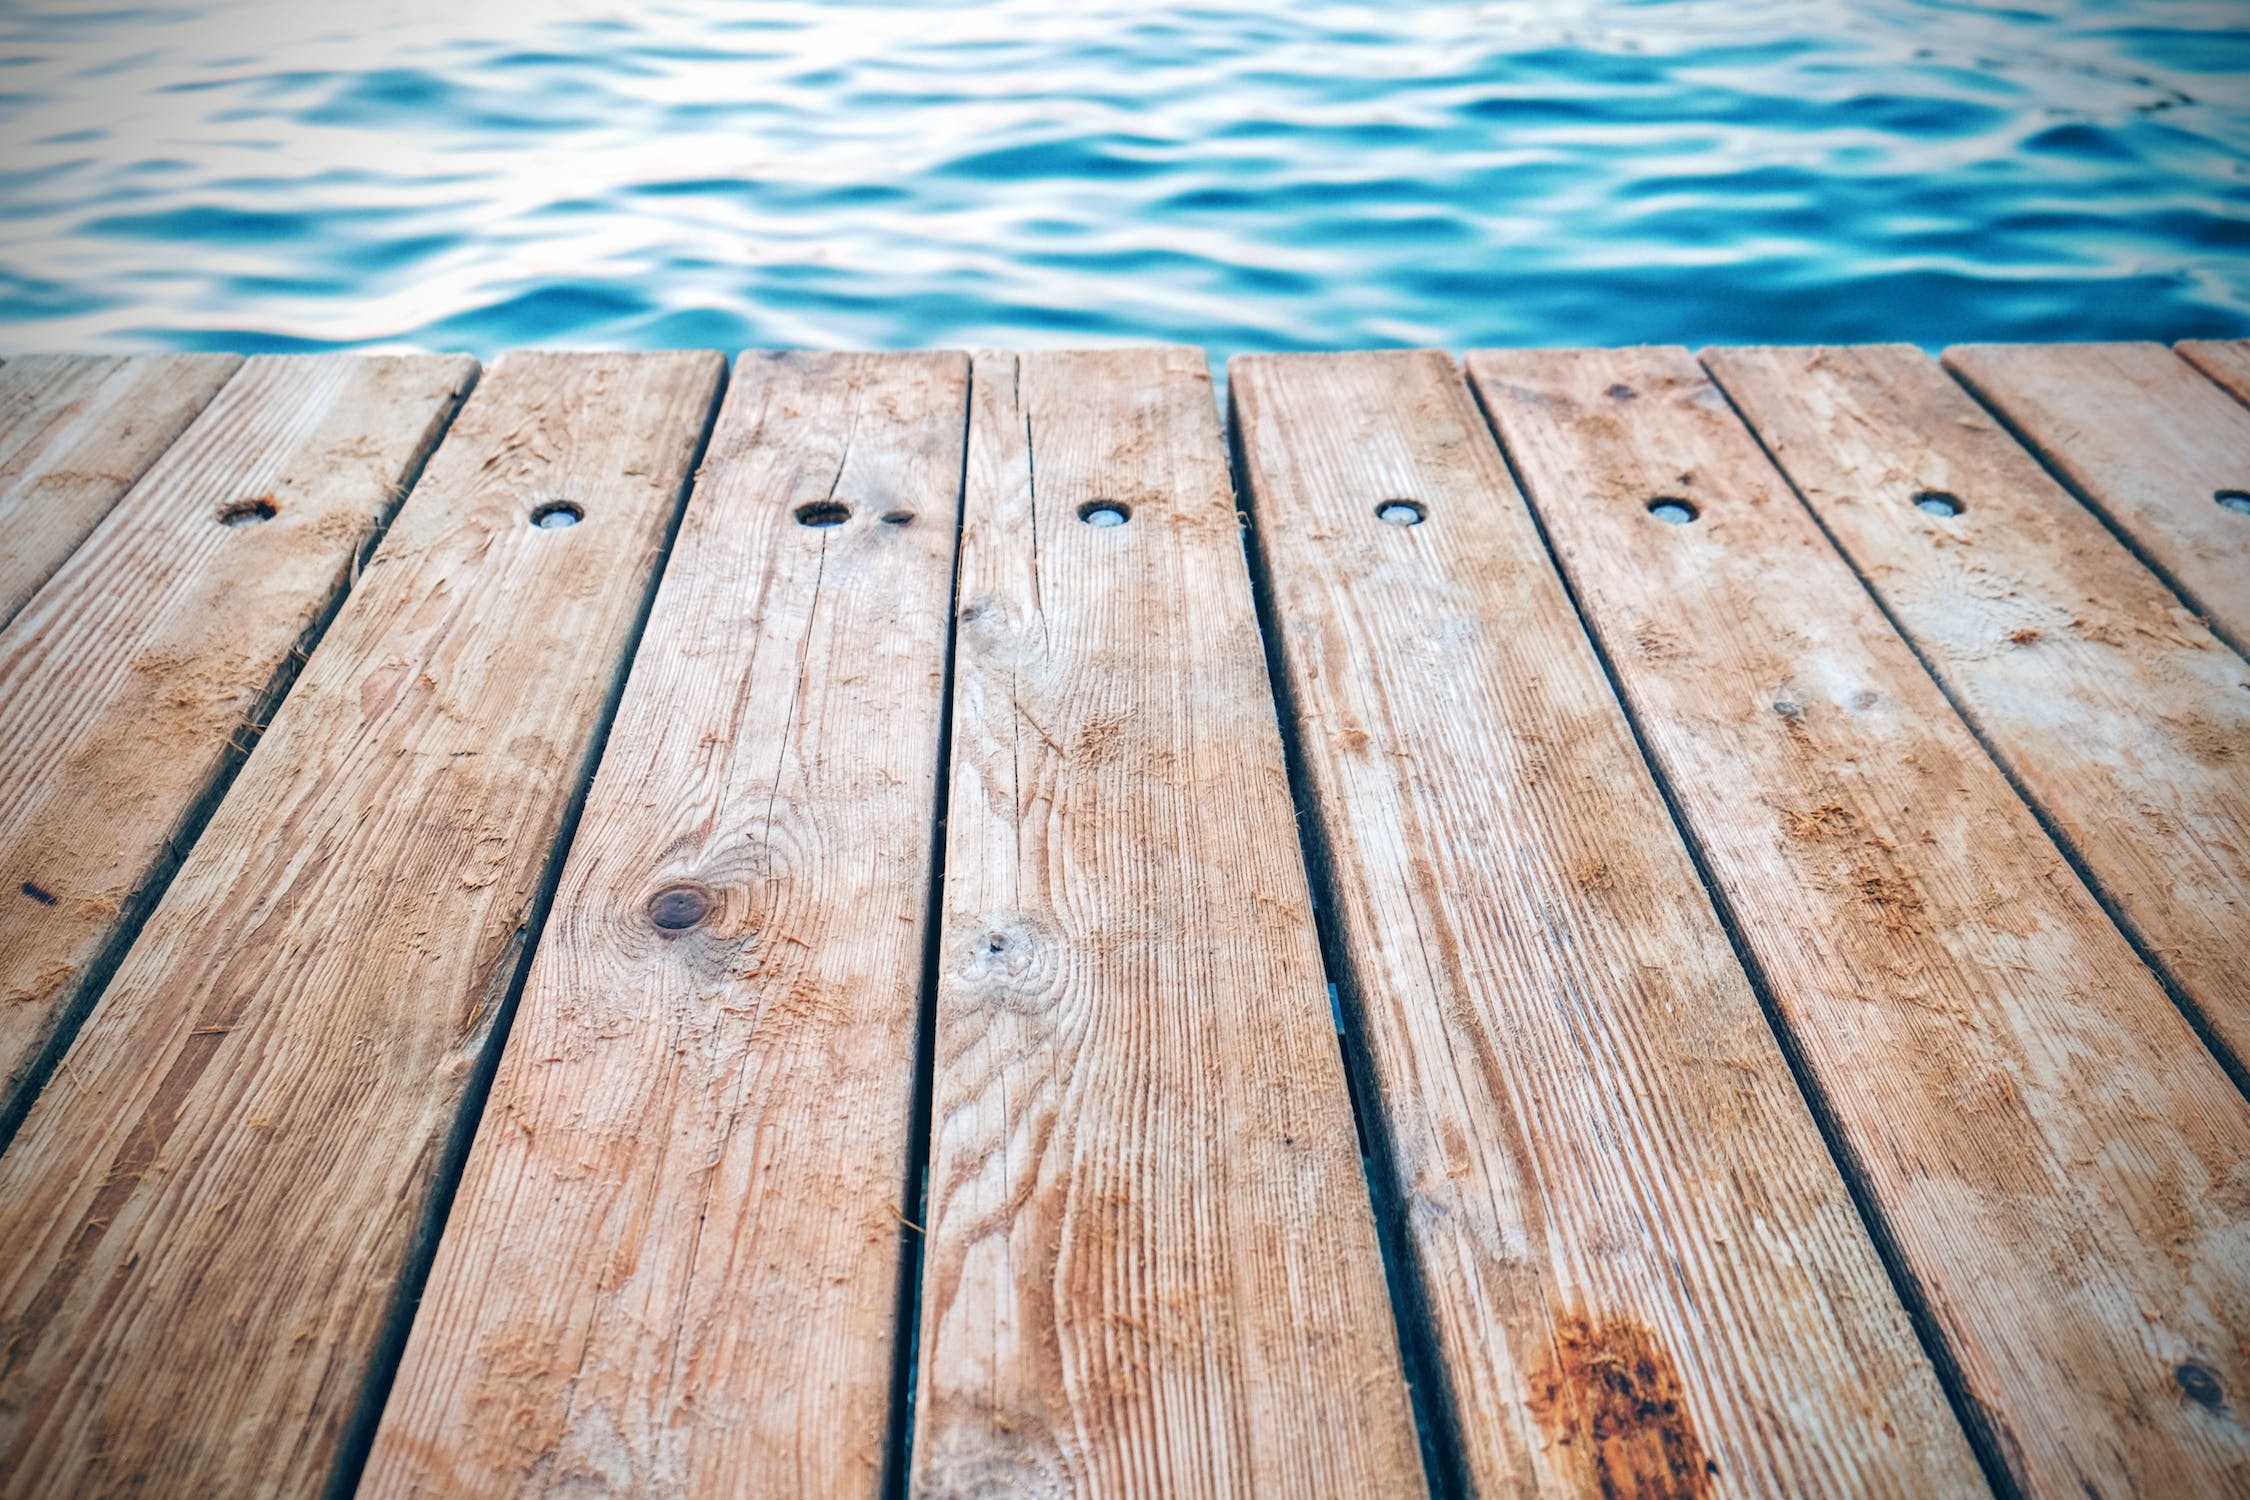 How to Work Safely on a Dock